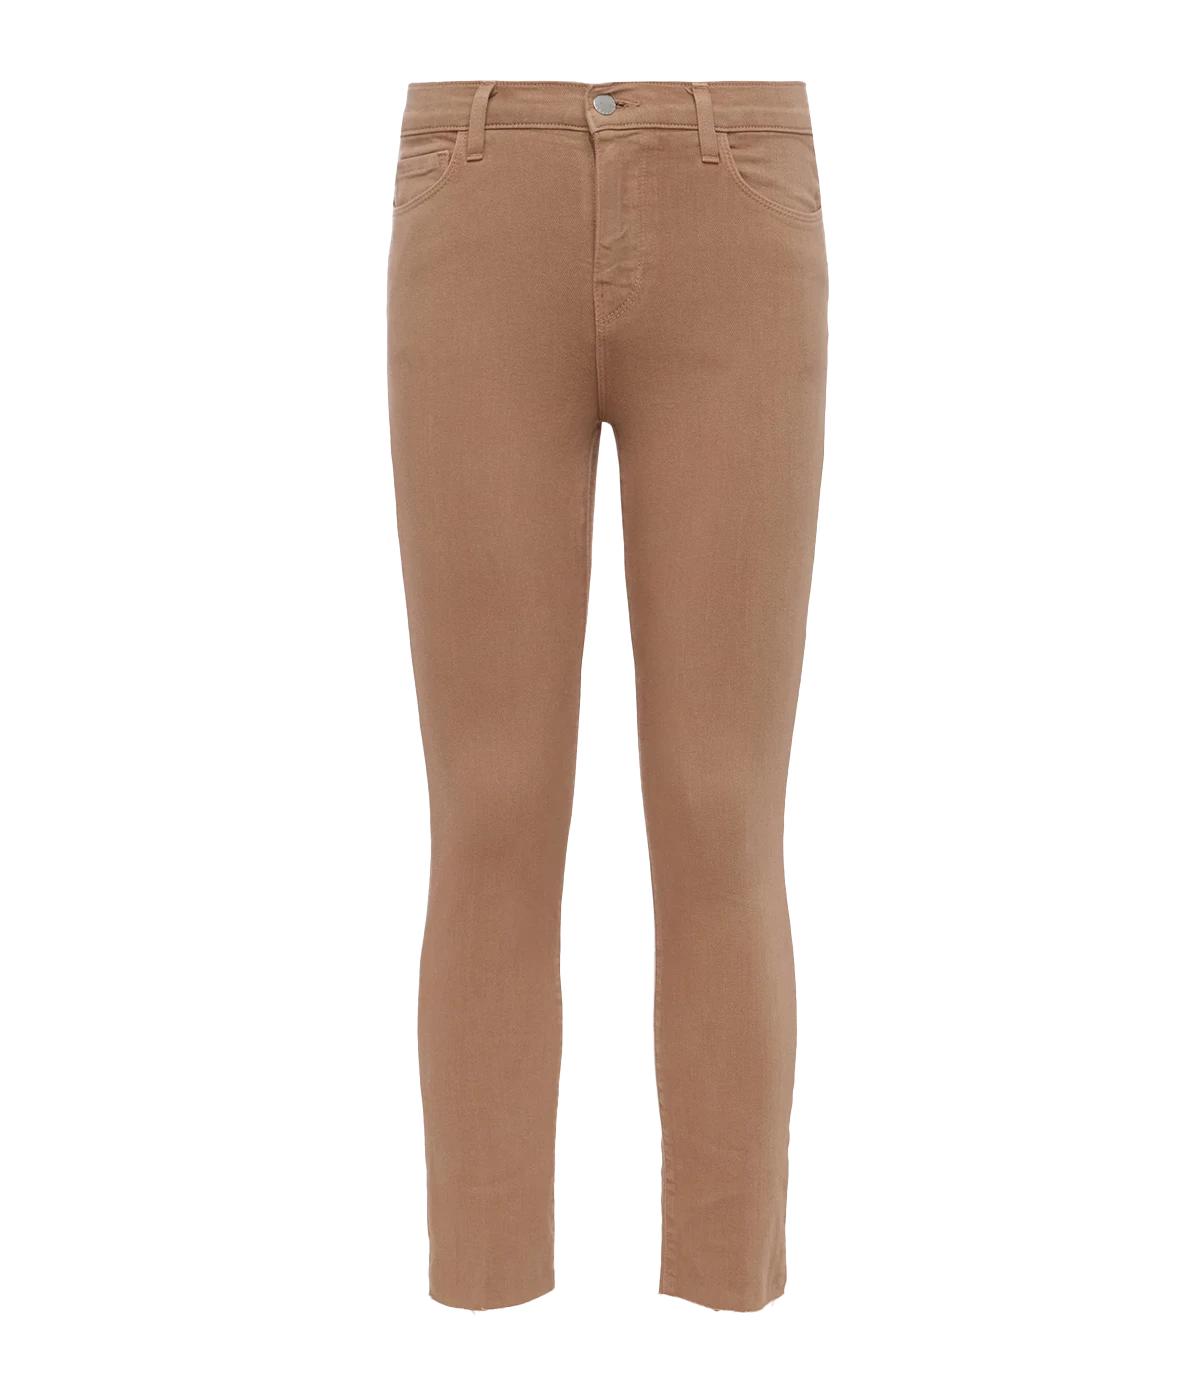 A classic high rise cropped jean, in a muted brown colourway, premium stretch denim, five-pocket construction, slim fit straight leg, made in USA. 